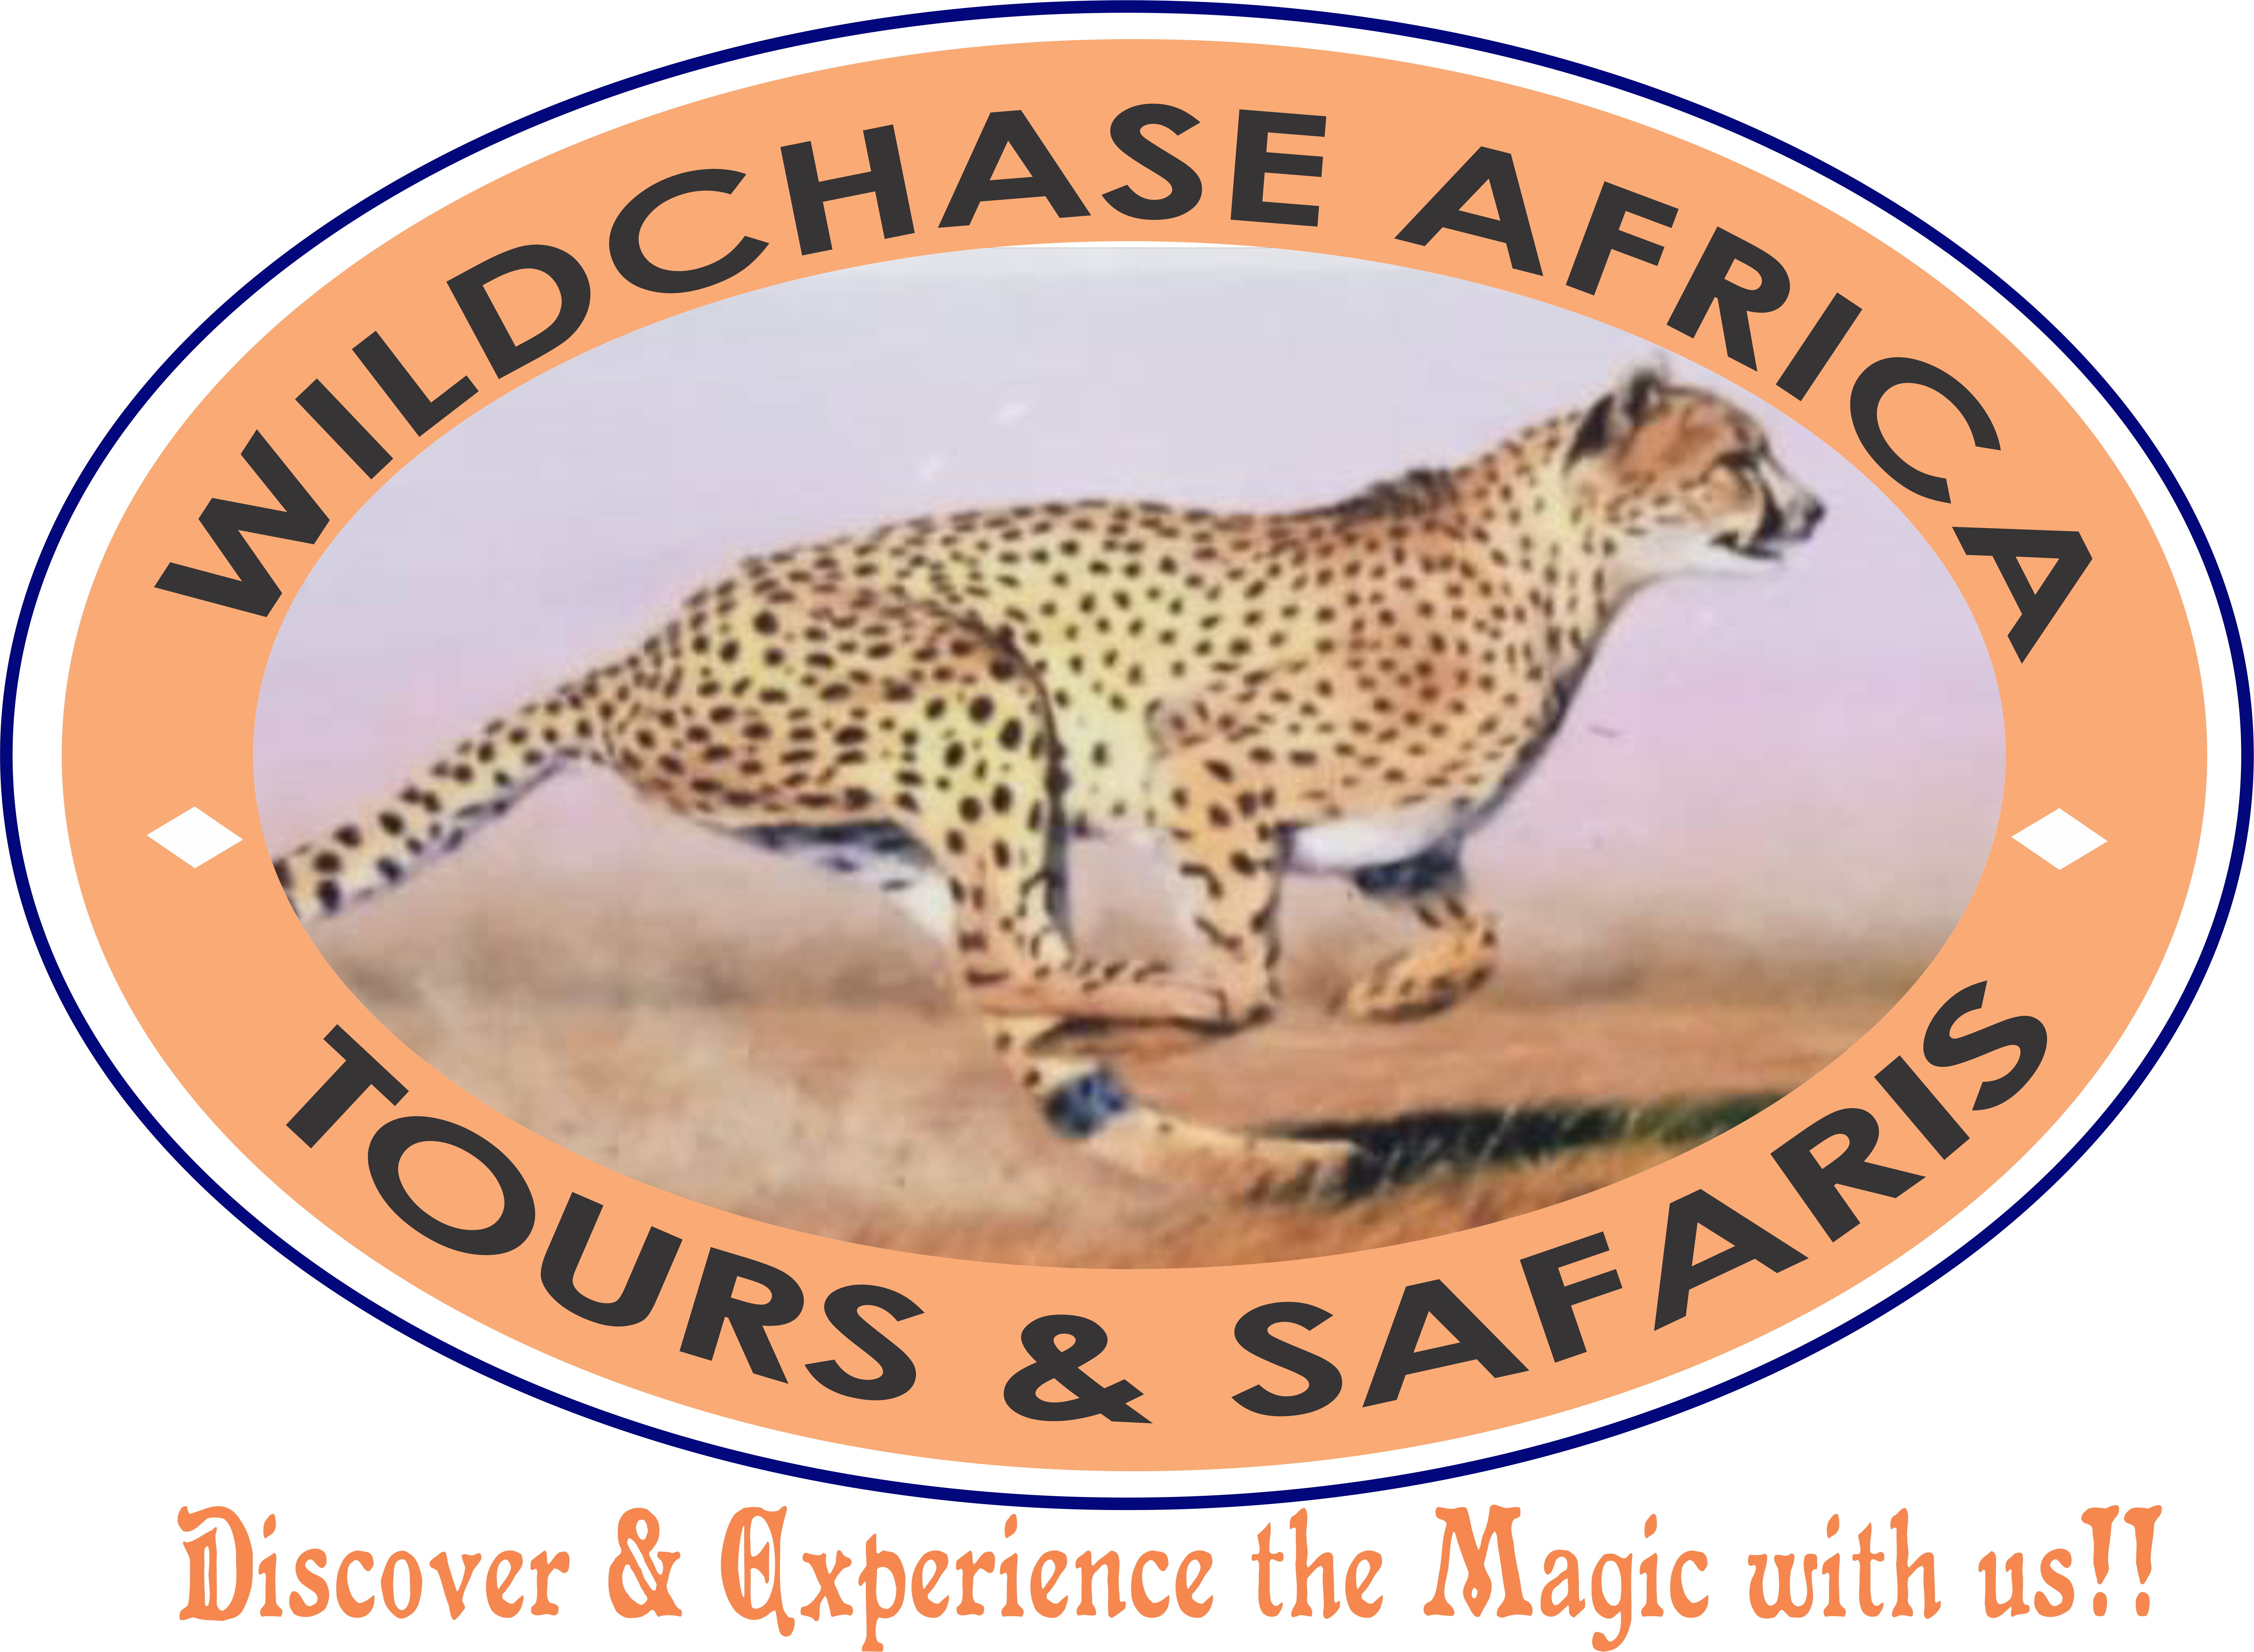 Wildchase Africa Tours & Travel